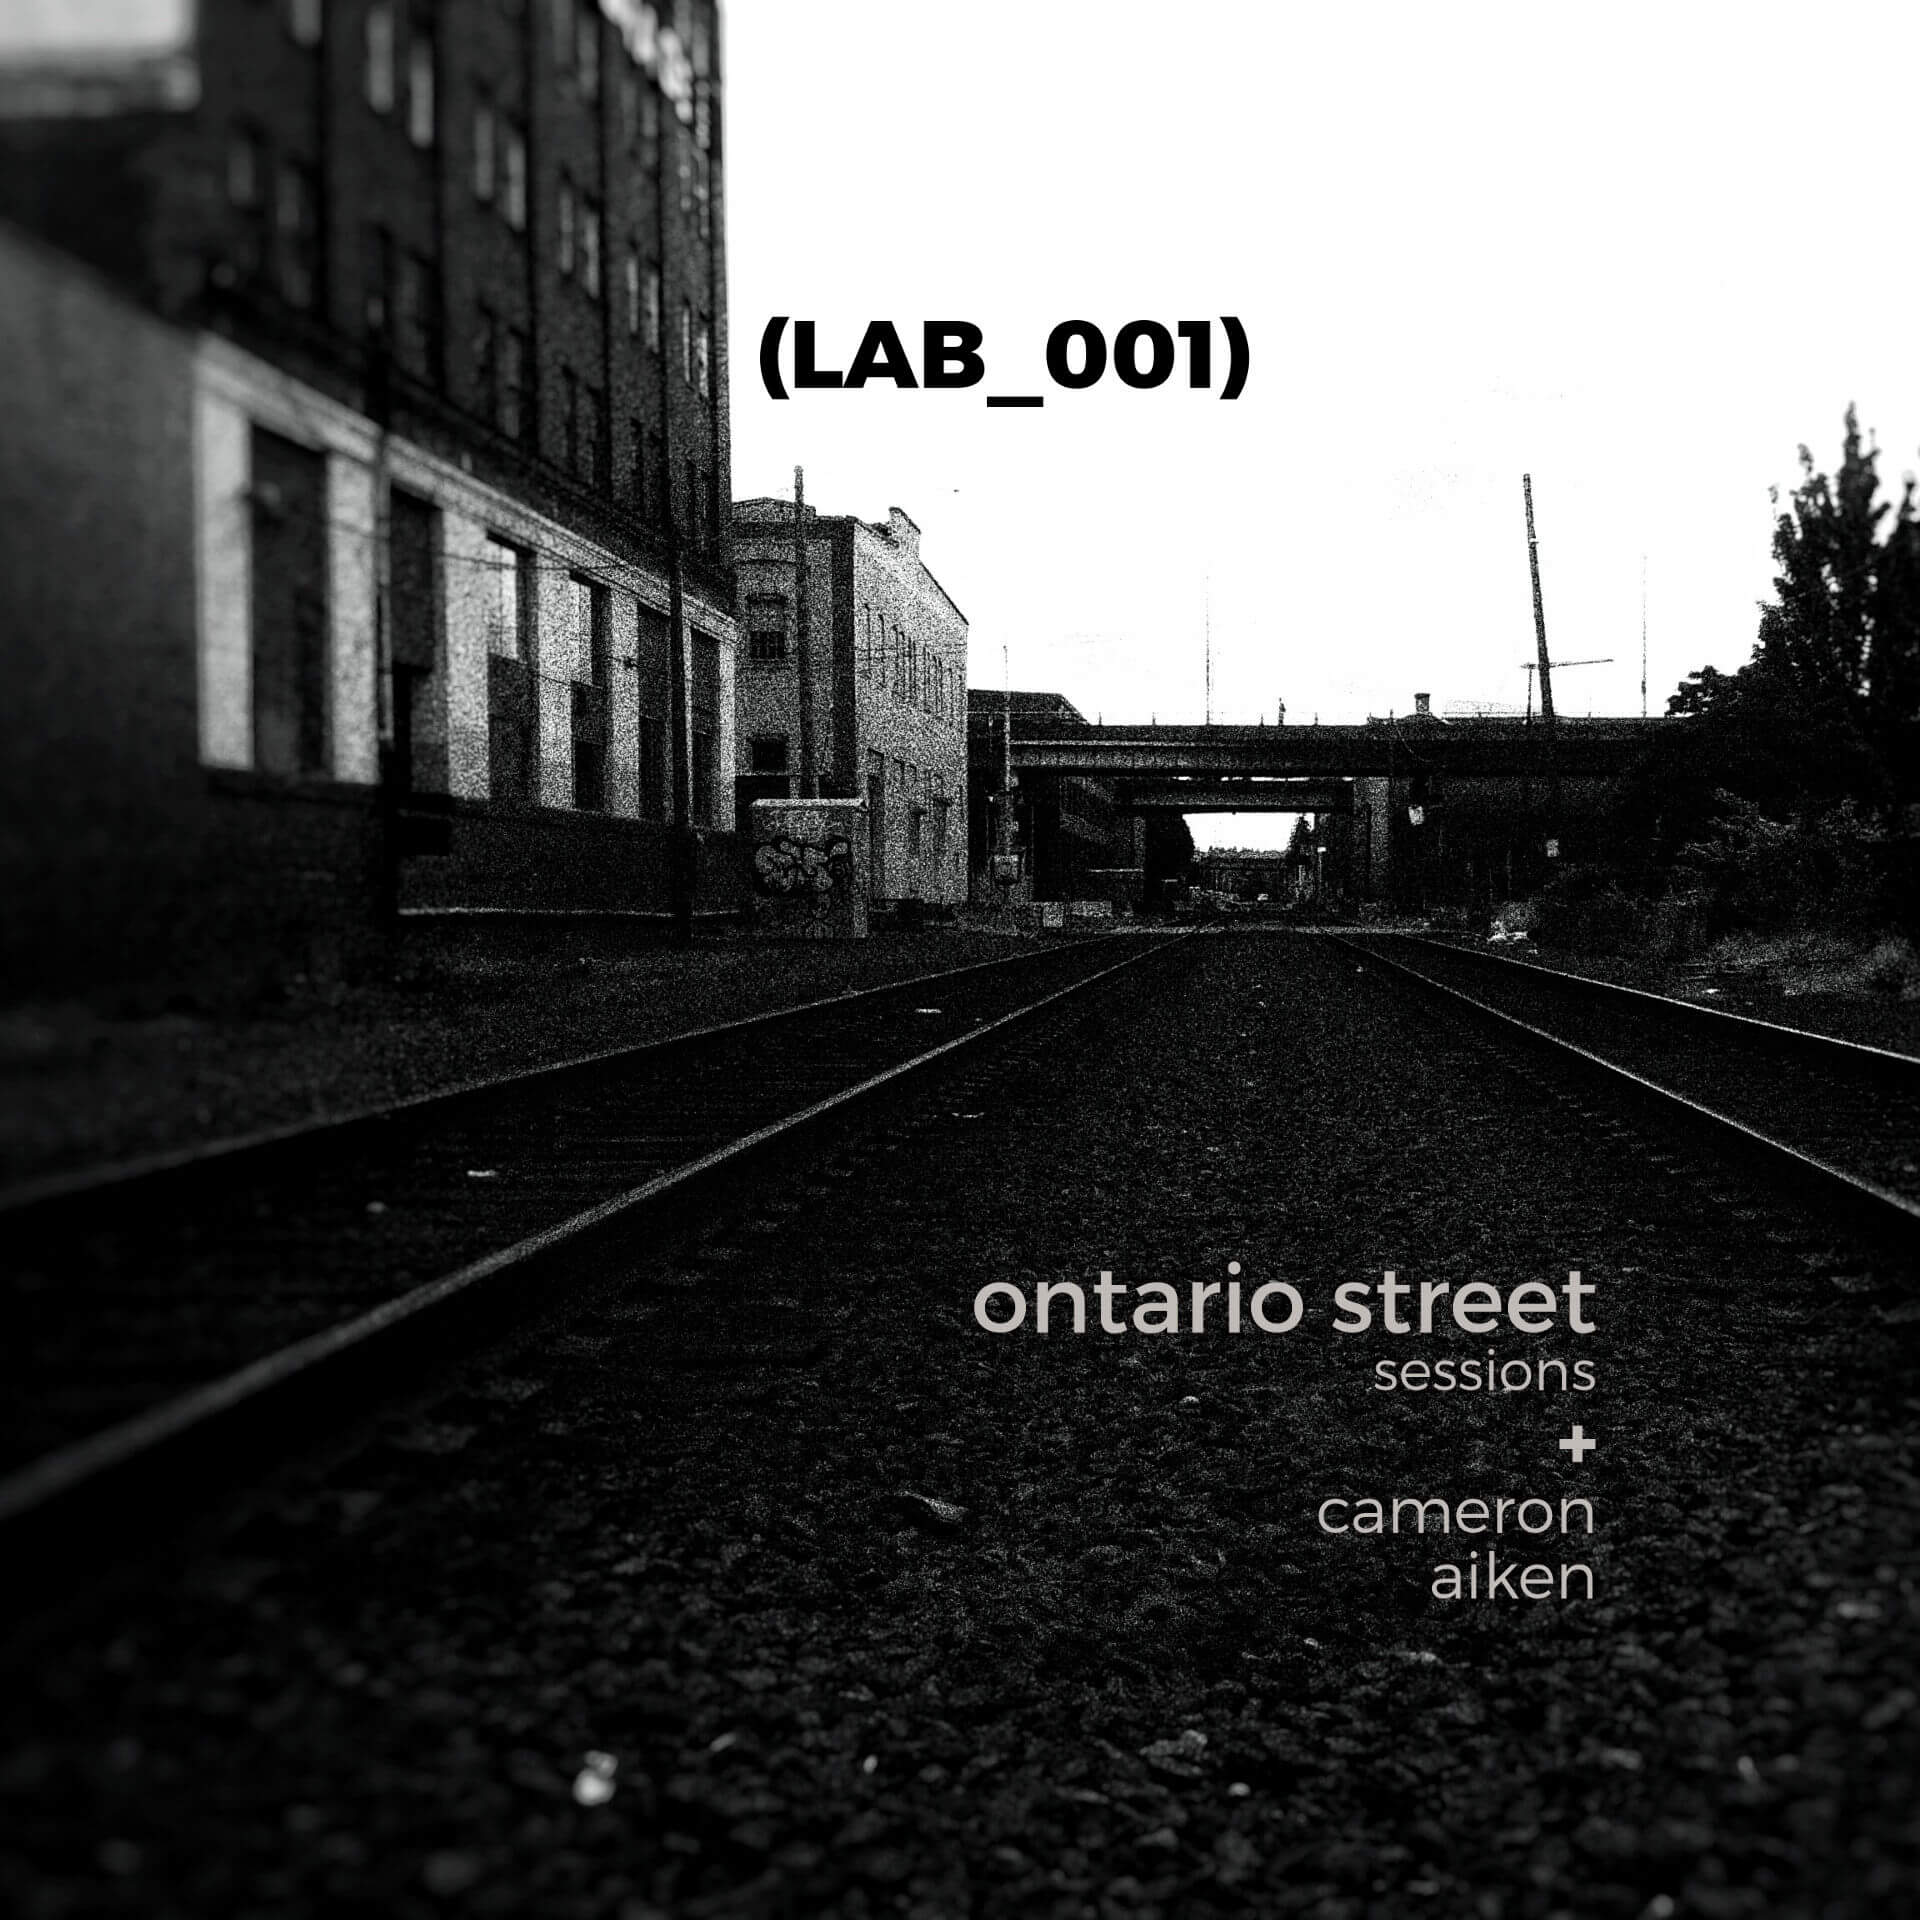 ontariostreet sessions (LAB_001)